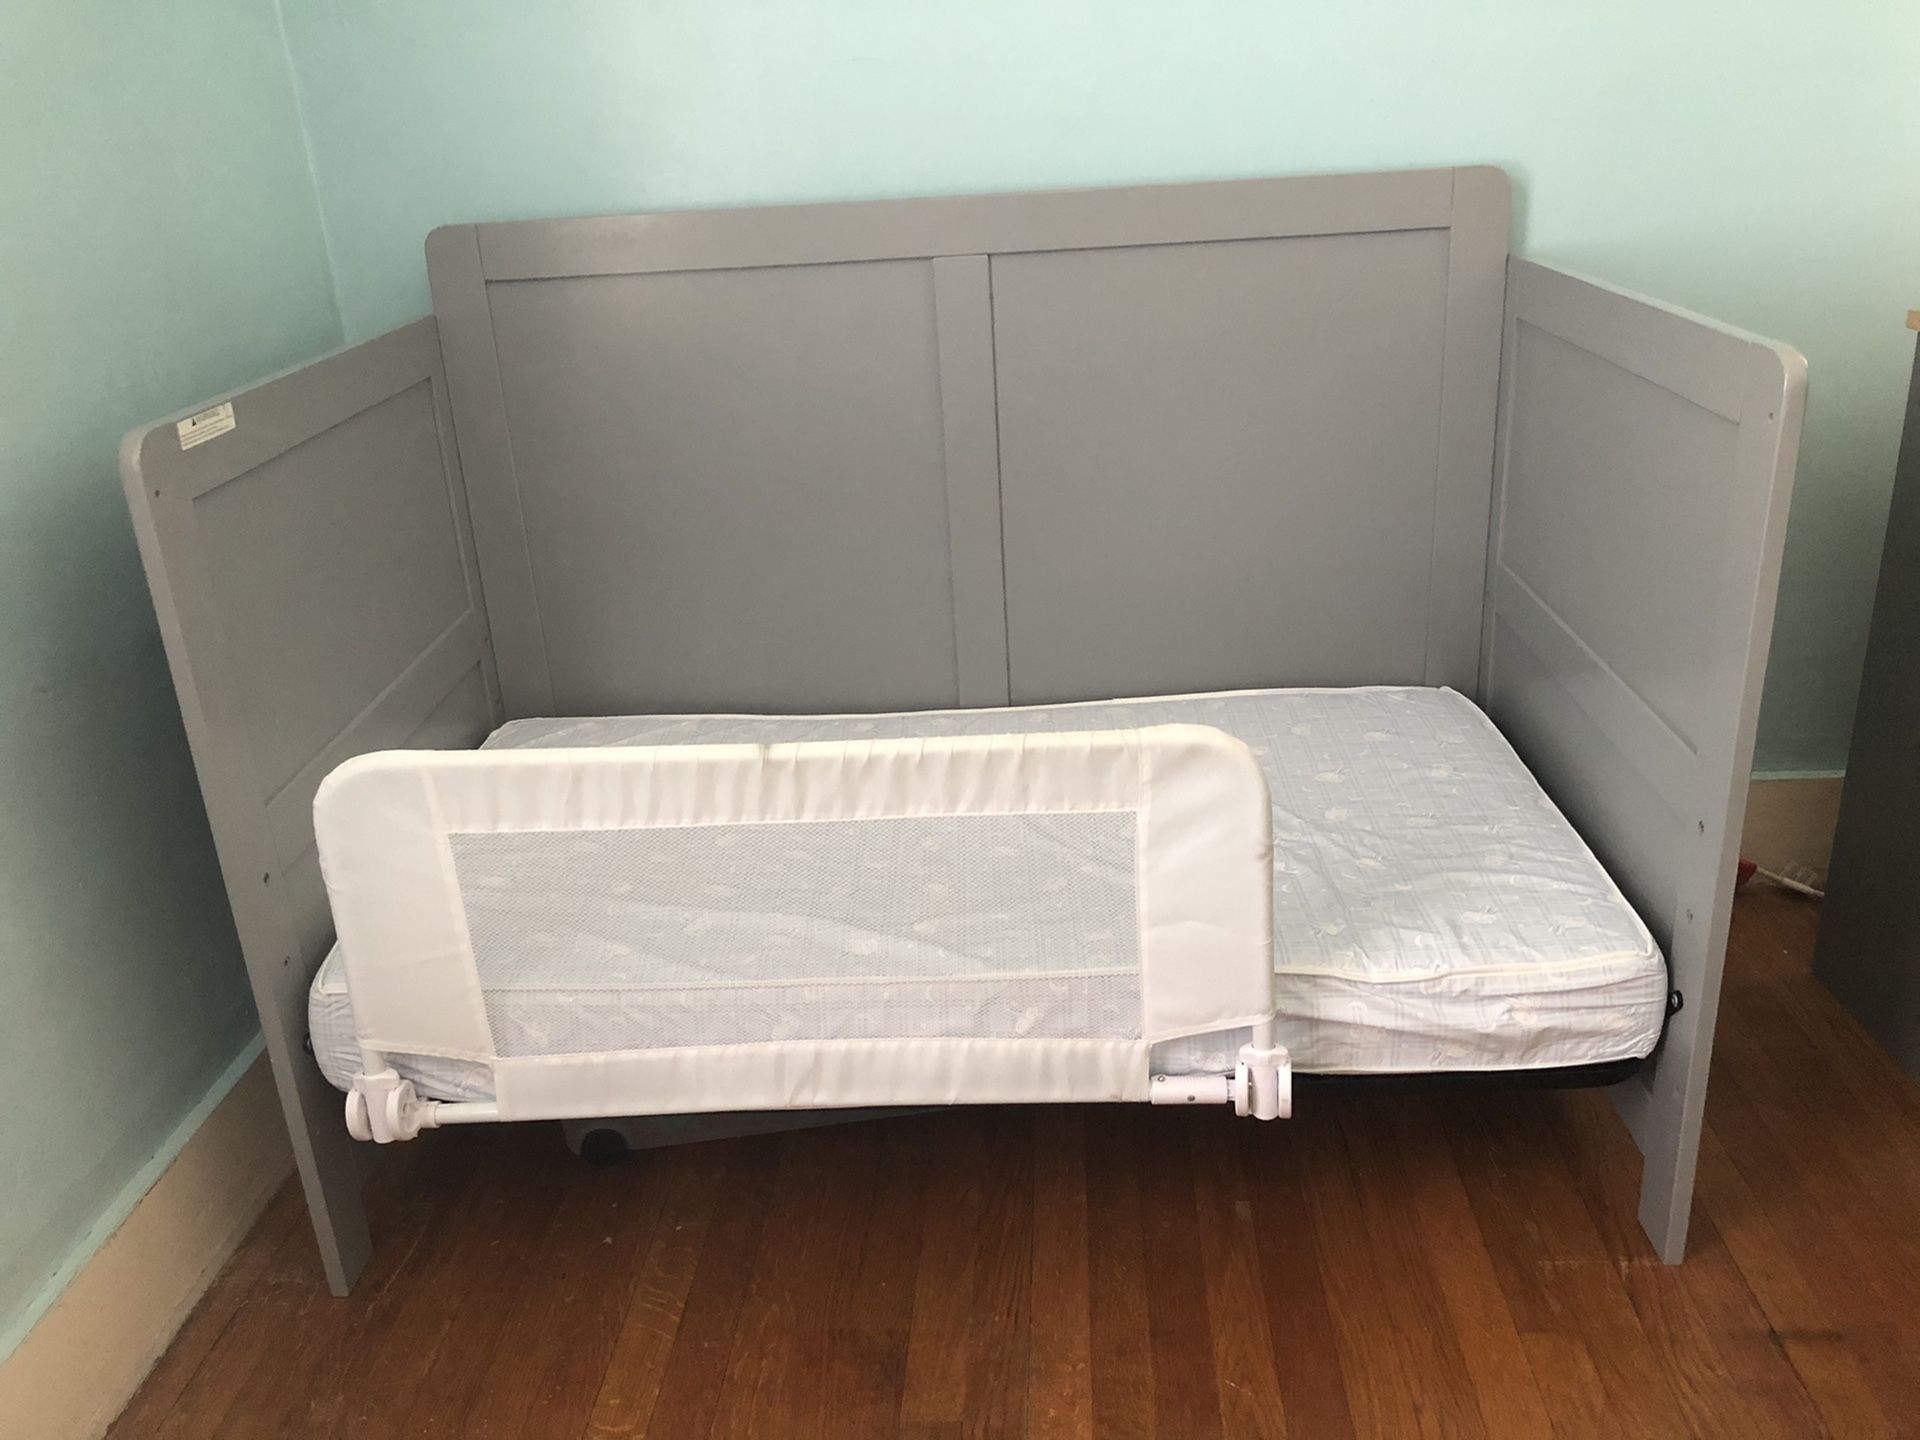 Crib AND changing table